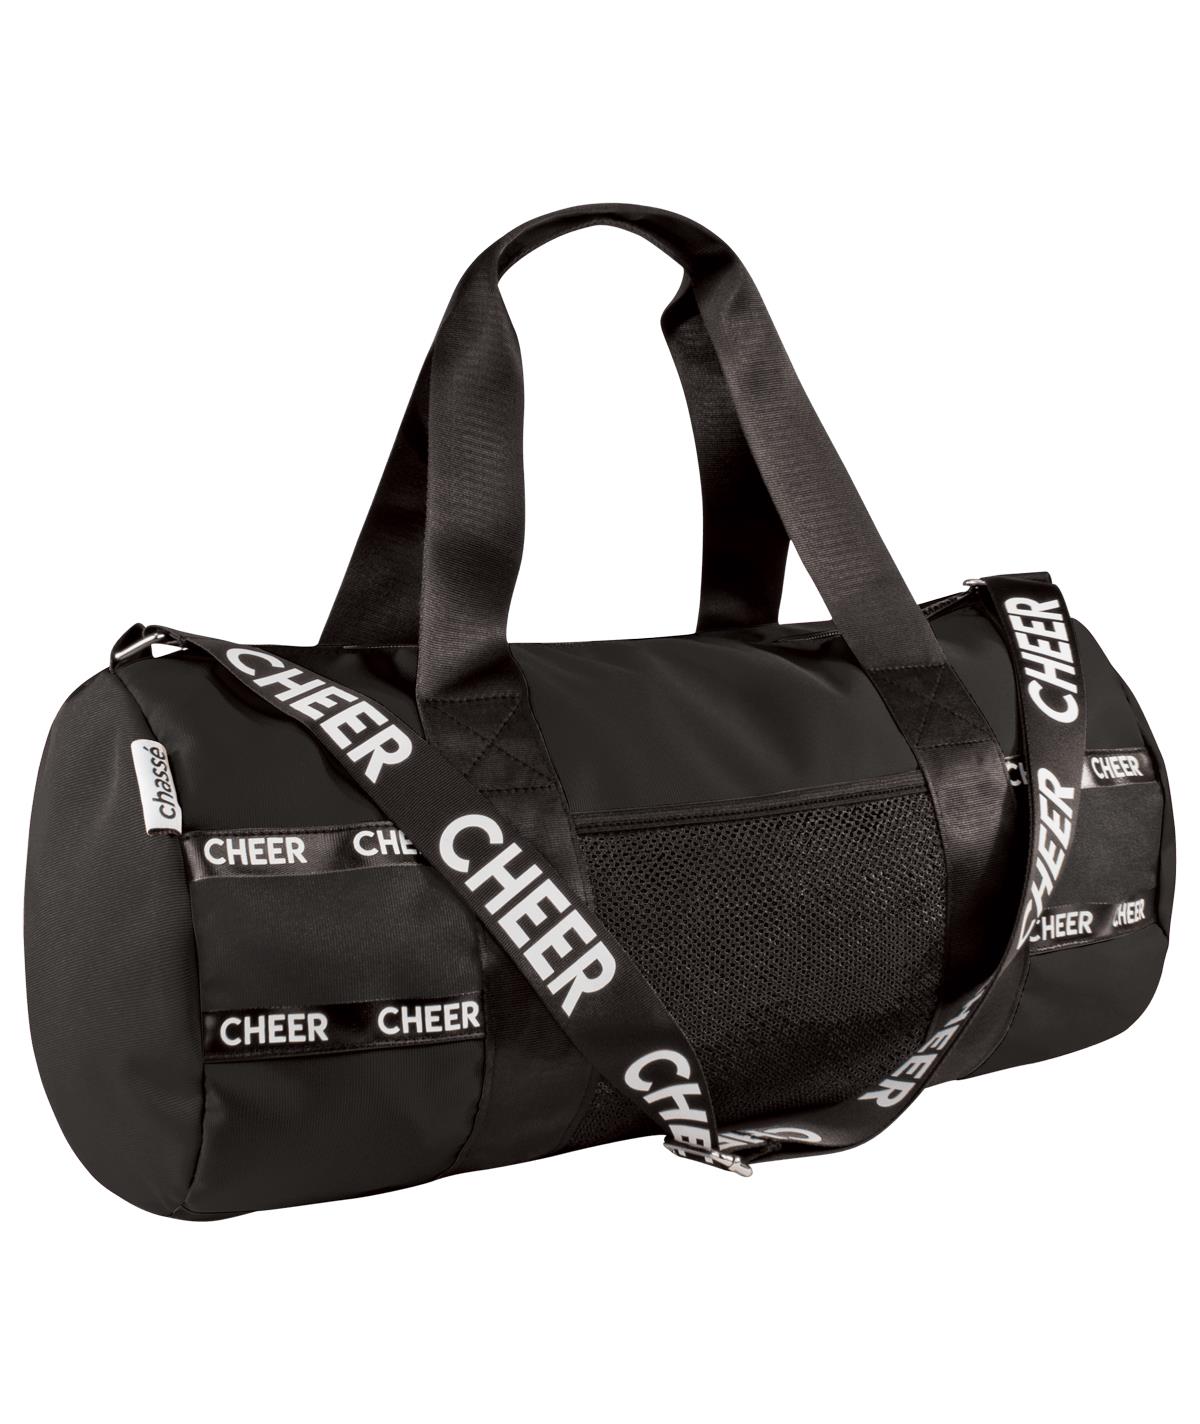 cheer duffle bags with shoe compartment